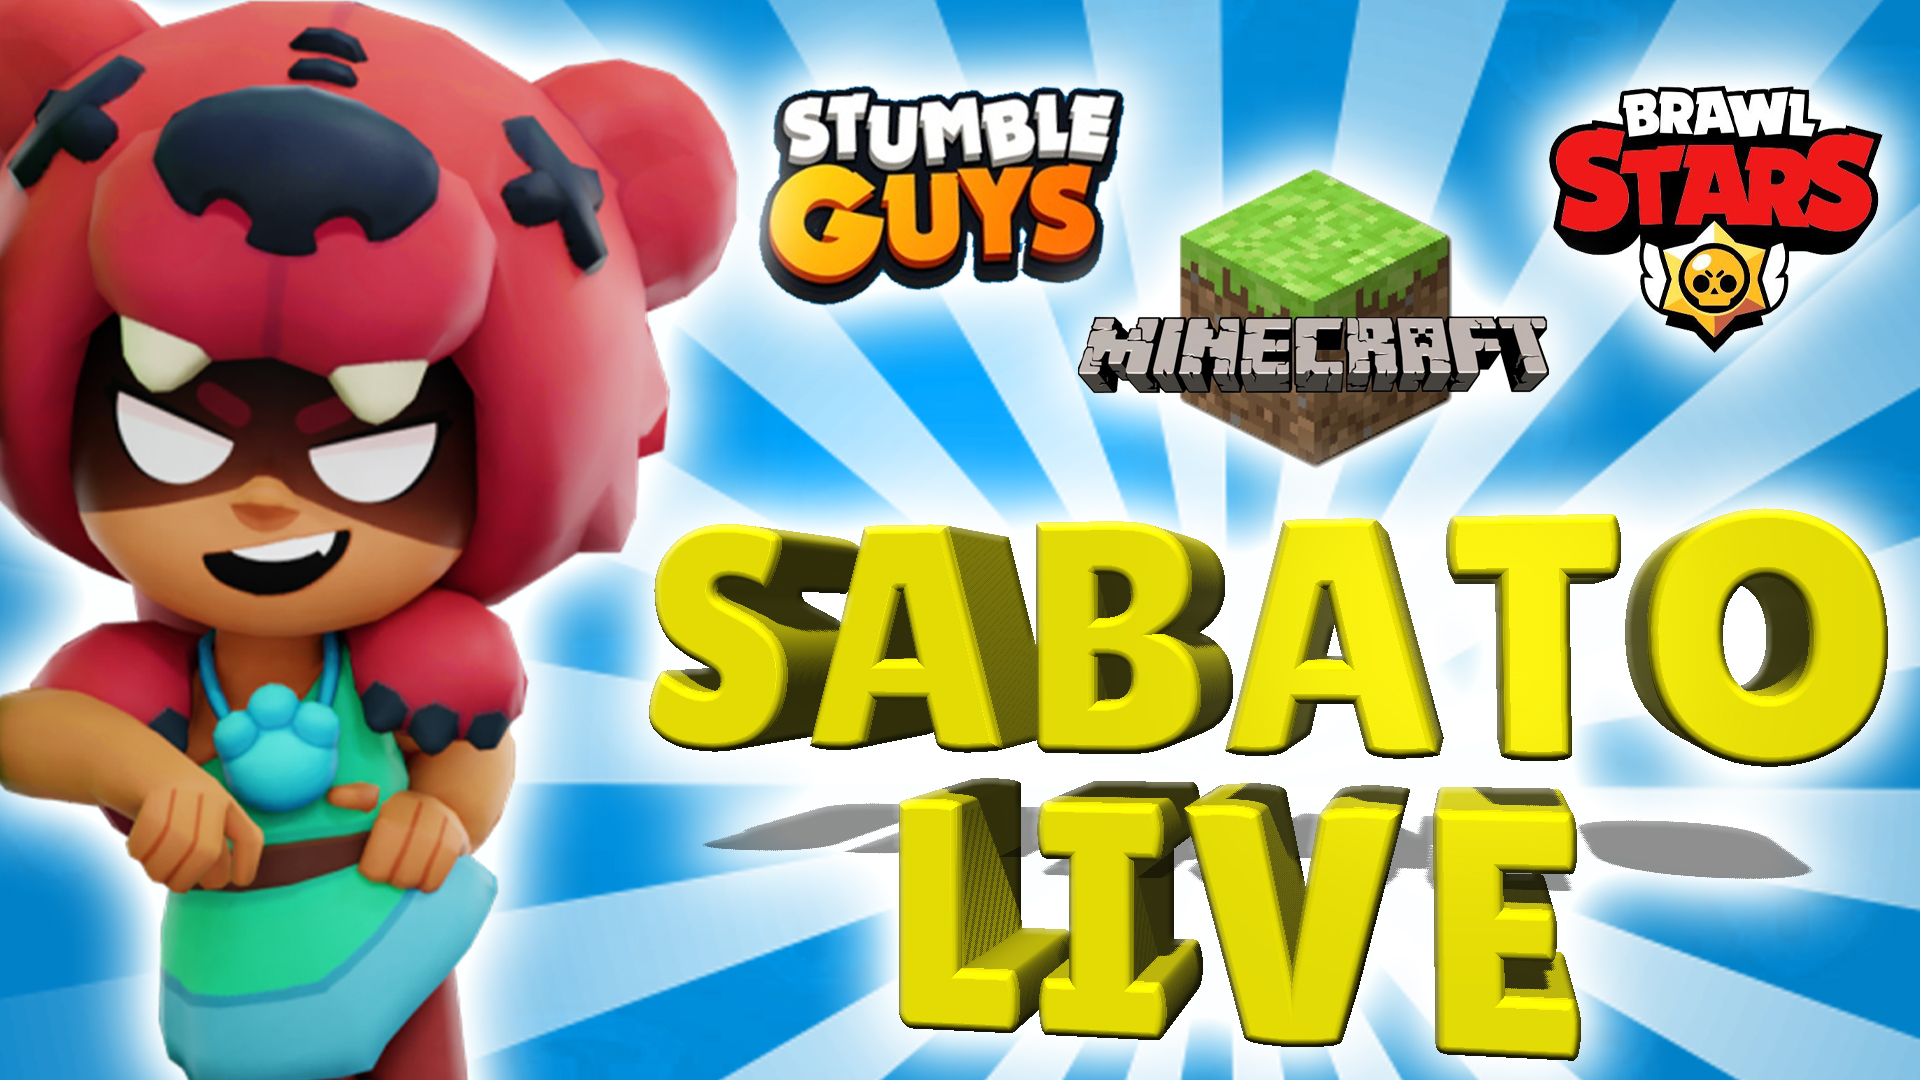 Today Super Live On Youtube To Have Fun With Brawl Stars Stumble Guys And Minecraft - foto brawl stars youtuber